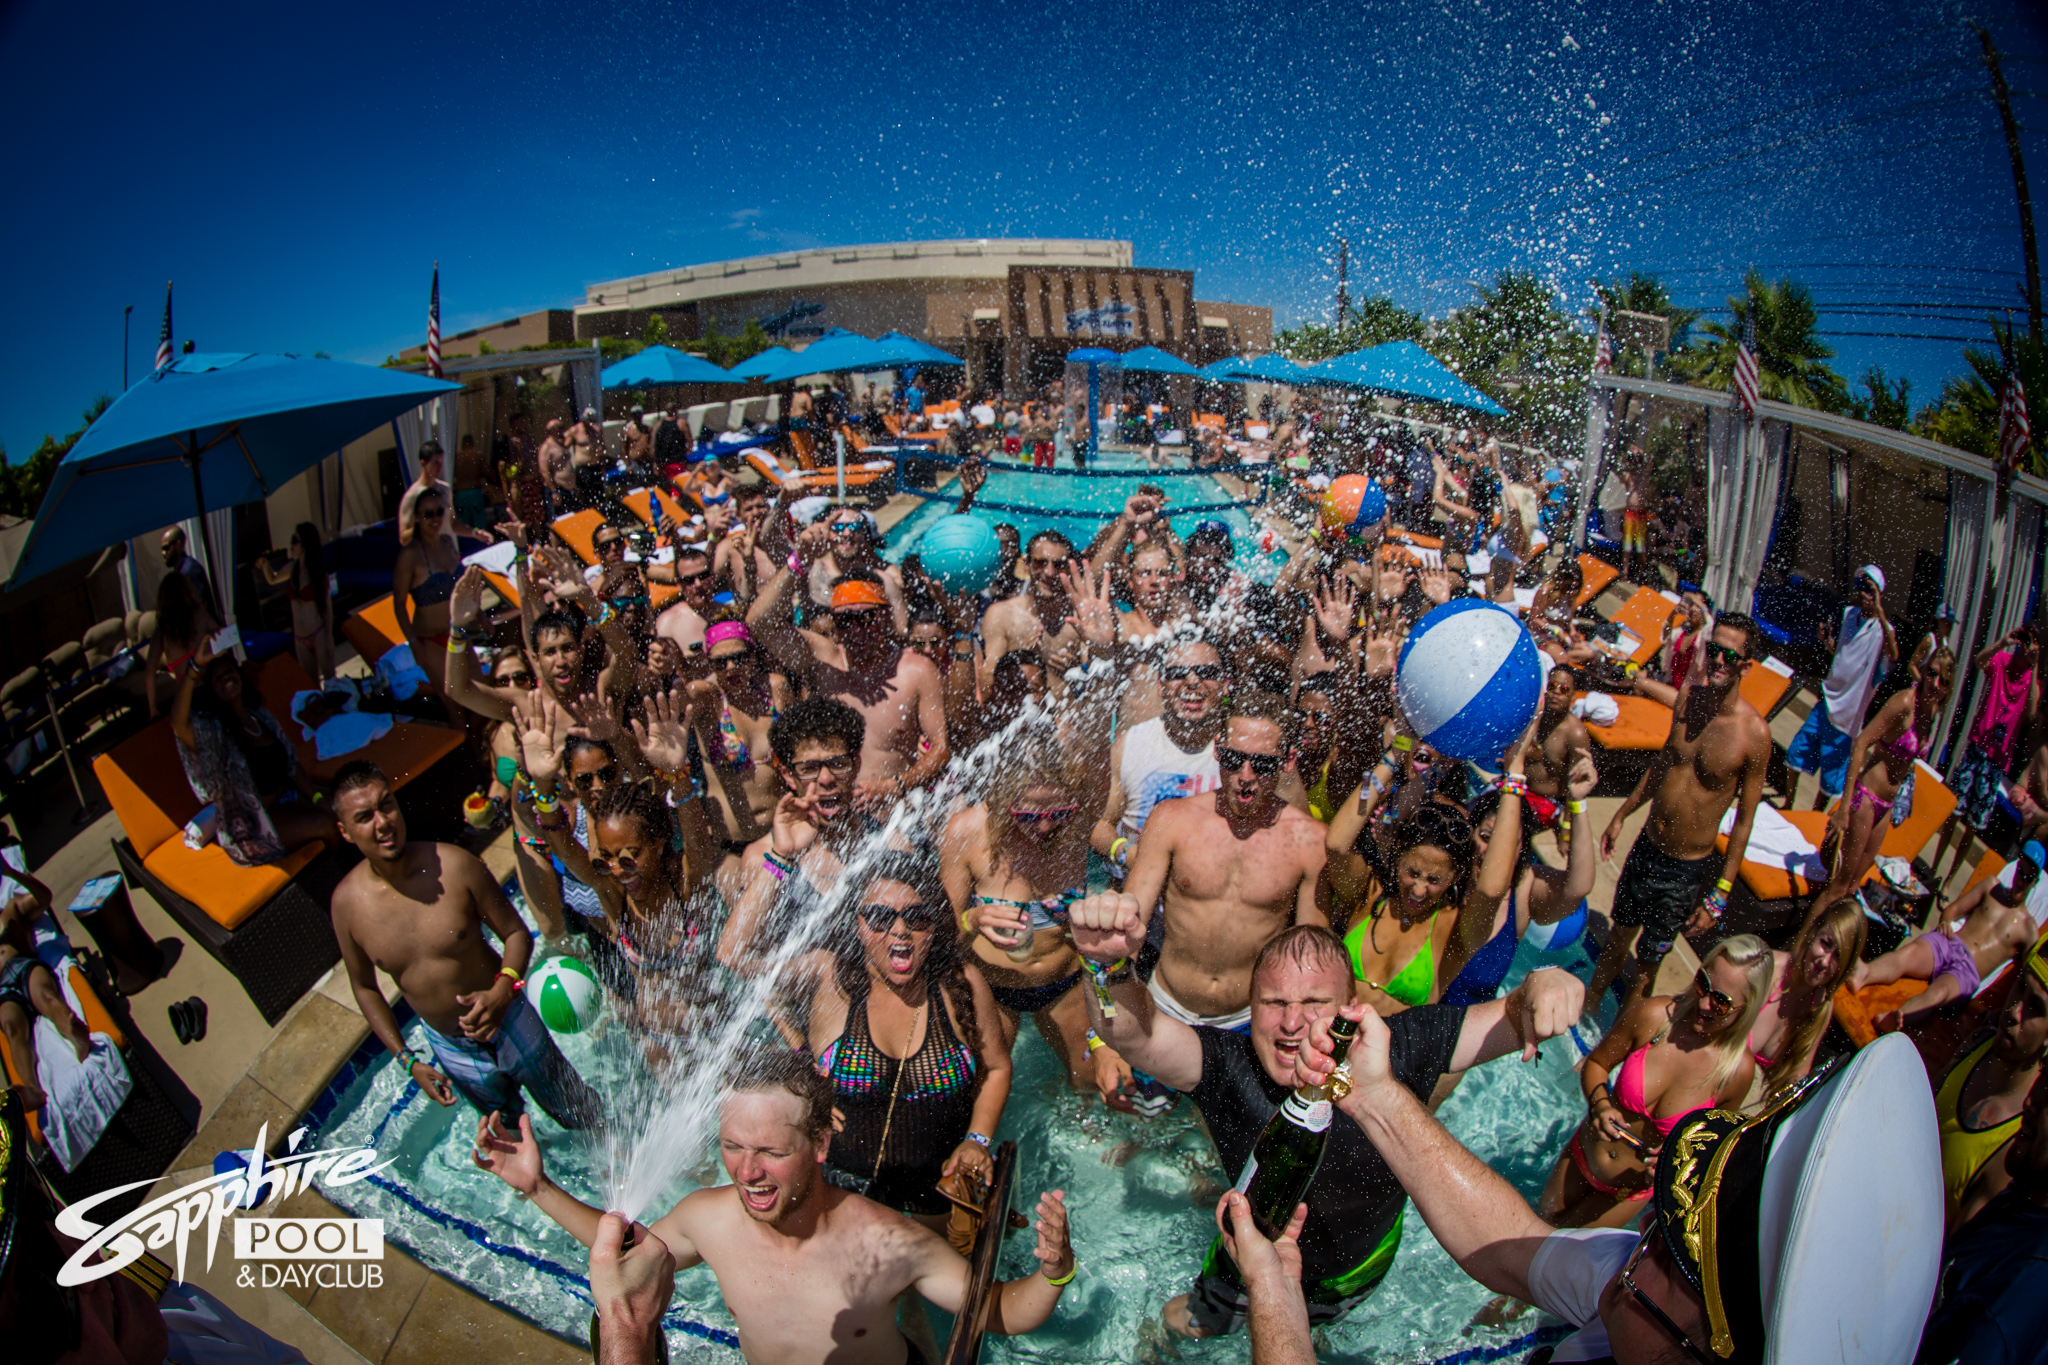 What Are The Top 5 Reasons To Do A Vegas Pool Party?